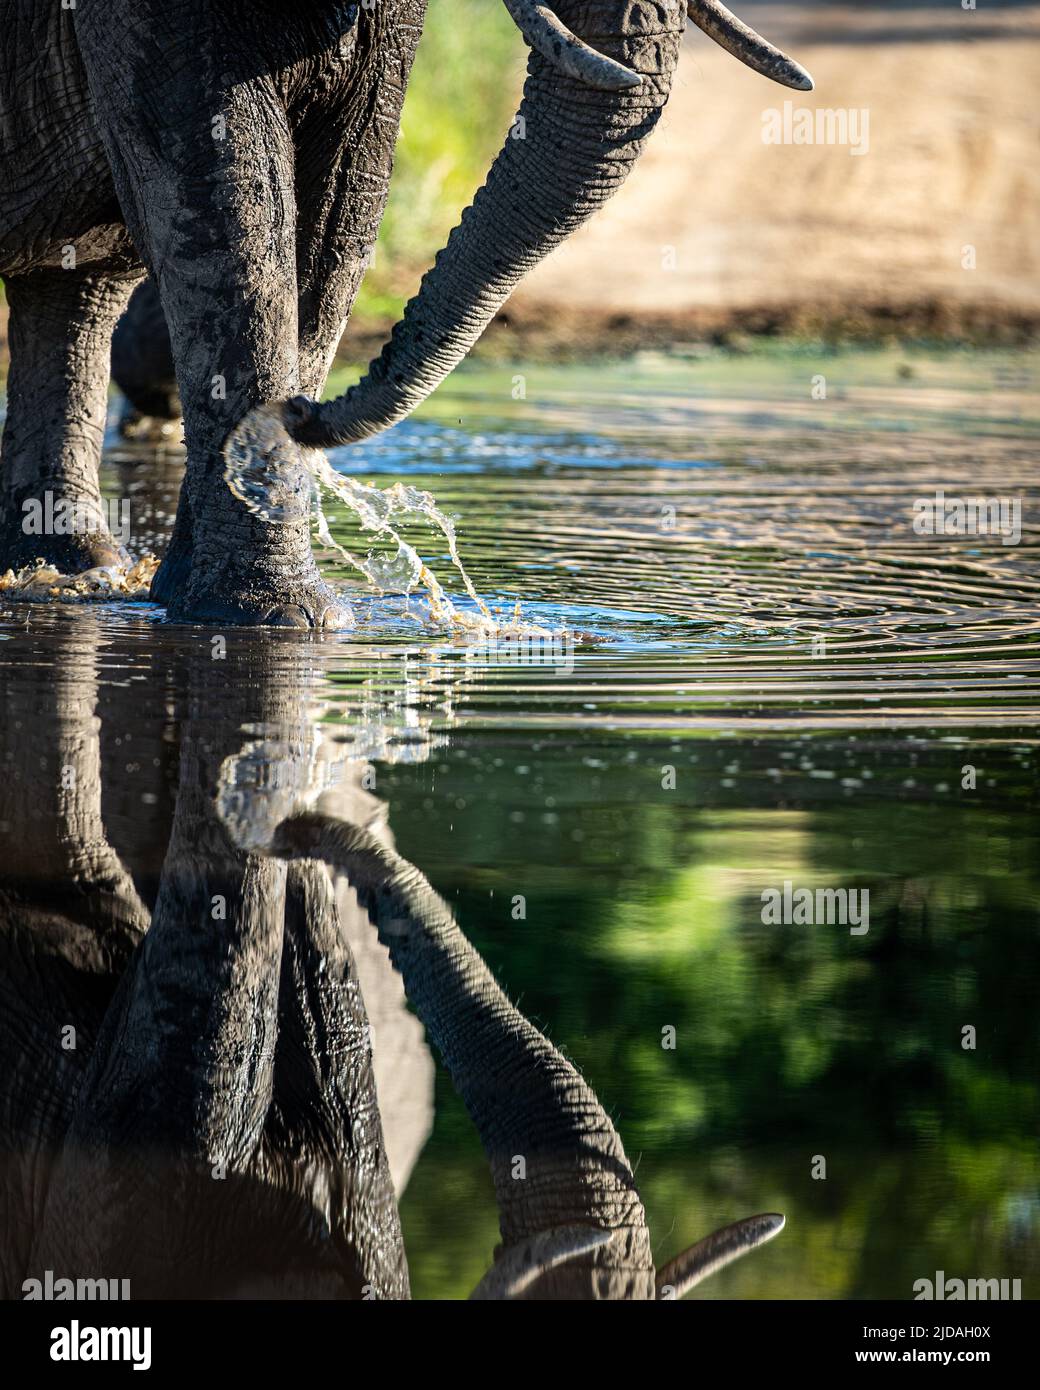 An elephant, Loxodonta africana, walks through water with a reflection Stock Photo